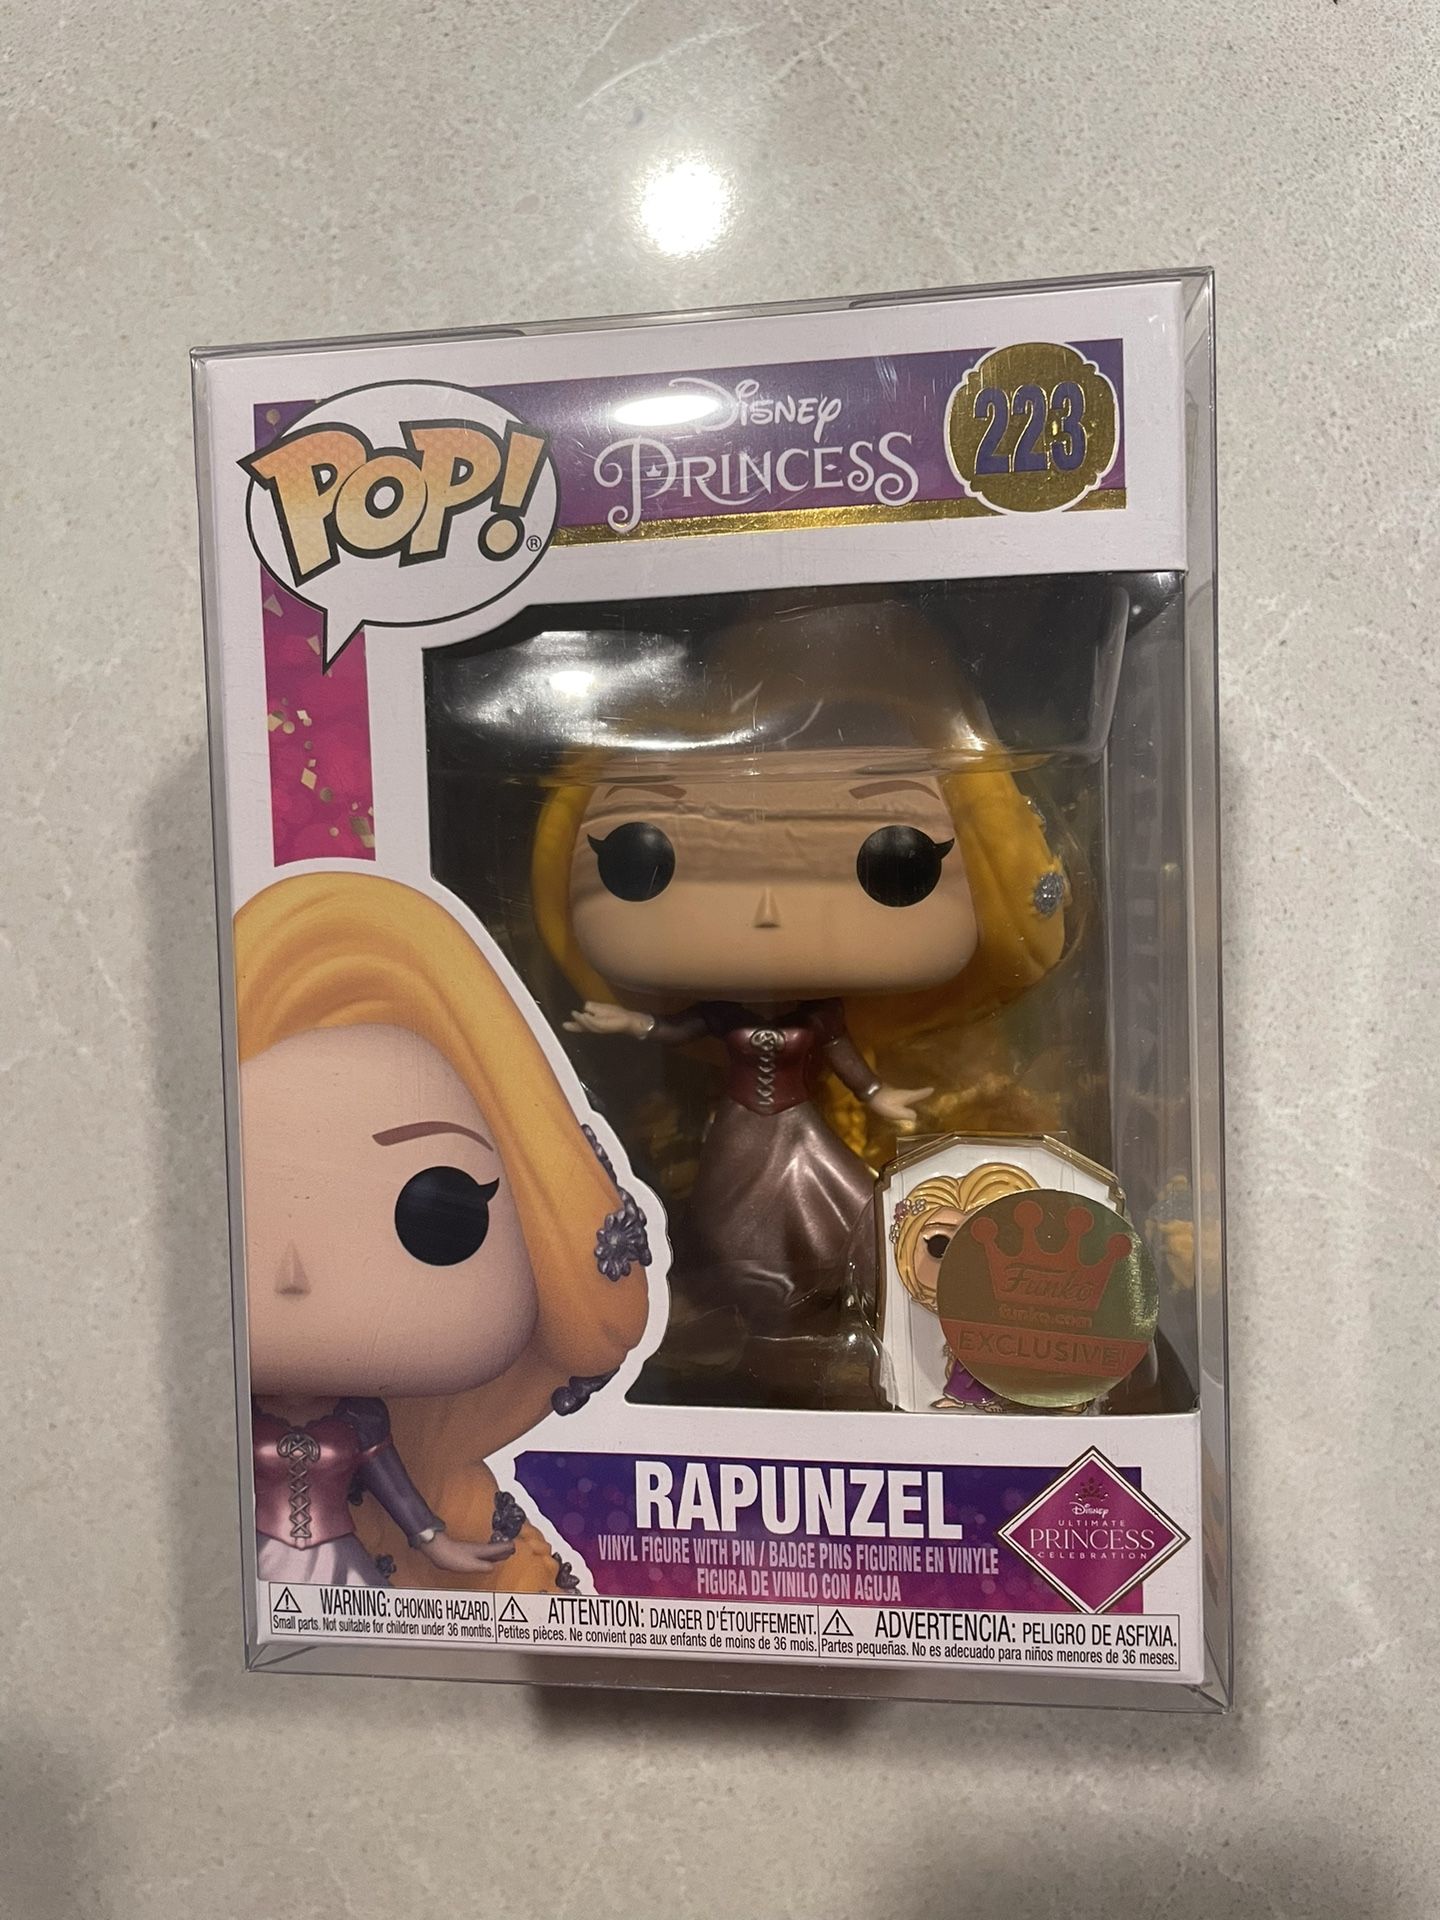 Rapunzel Ultimate Princess Collection Funko Pop + Pin *MINT* Online Shop Exclusive Disney Tangled 223 with protector Diamond Metallic